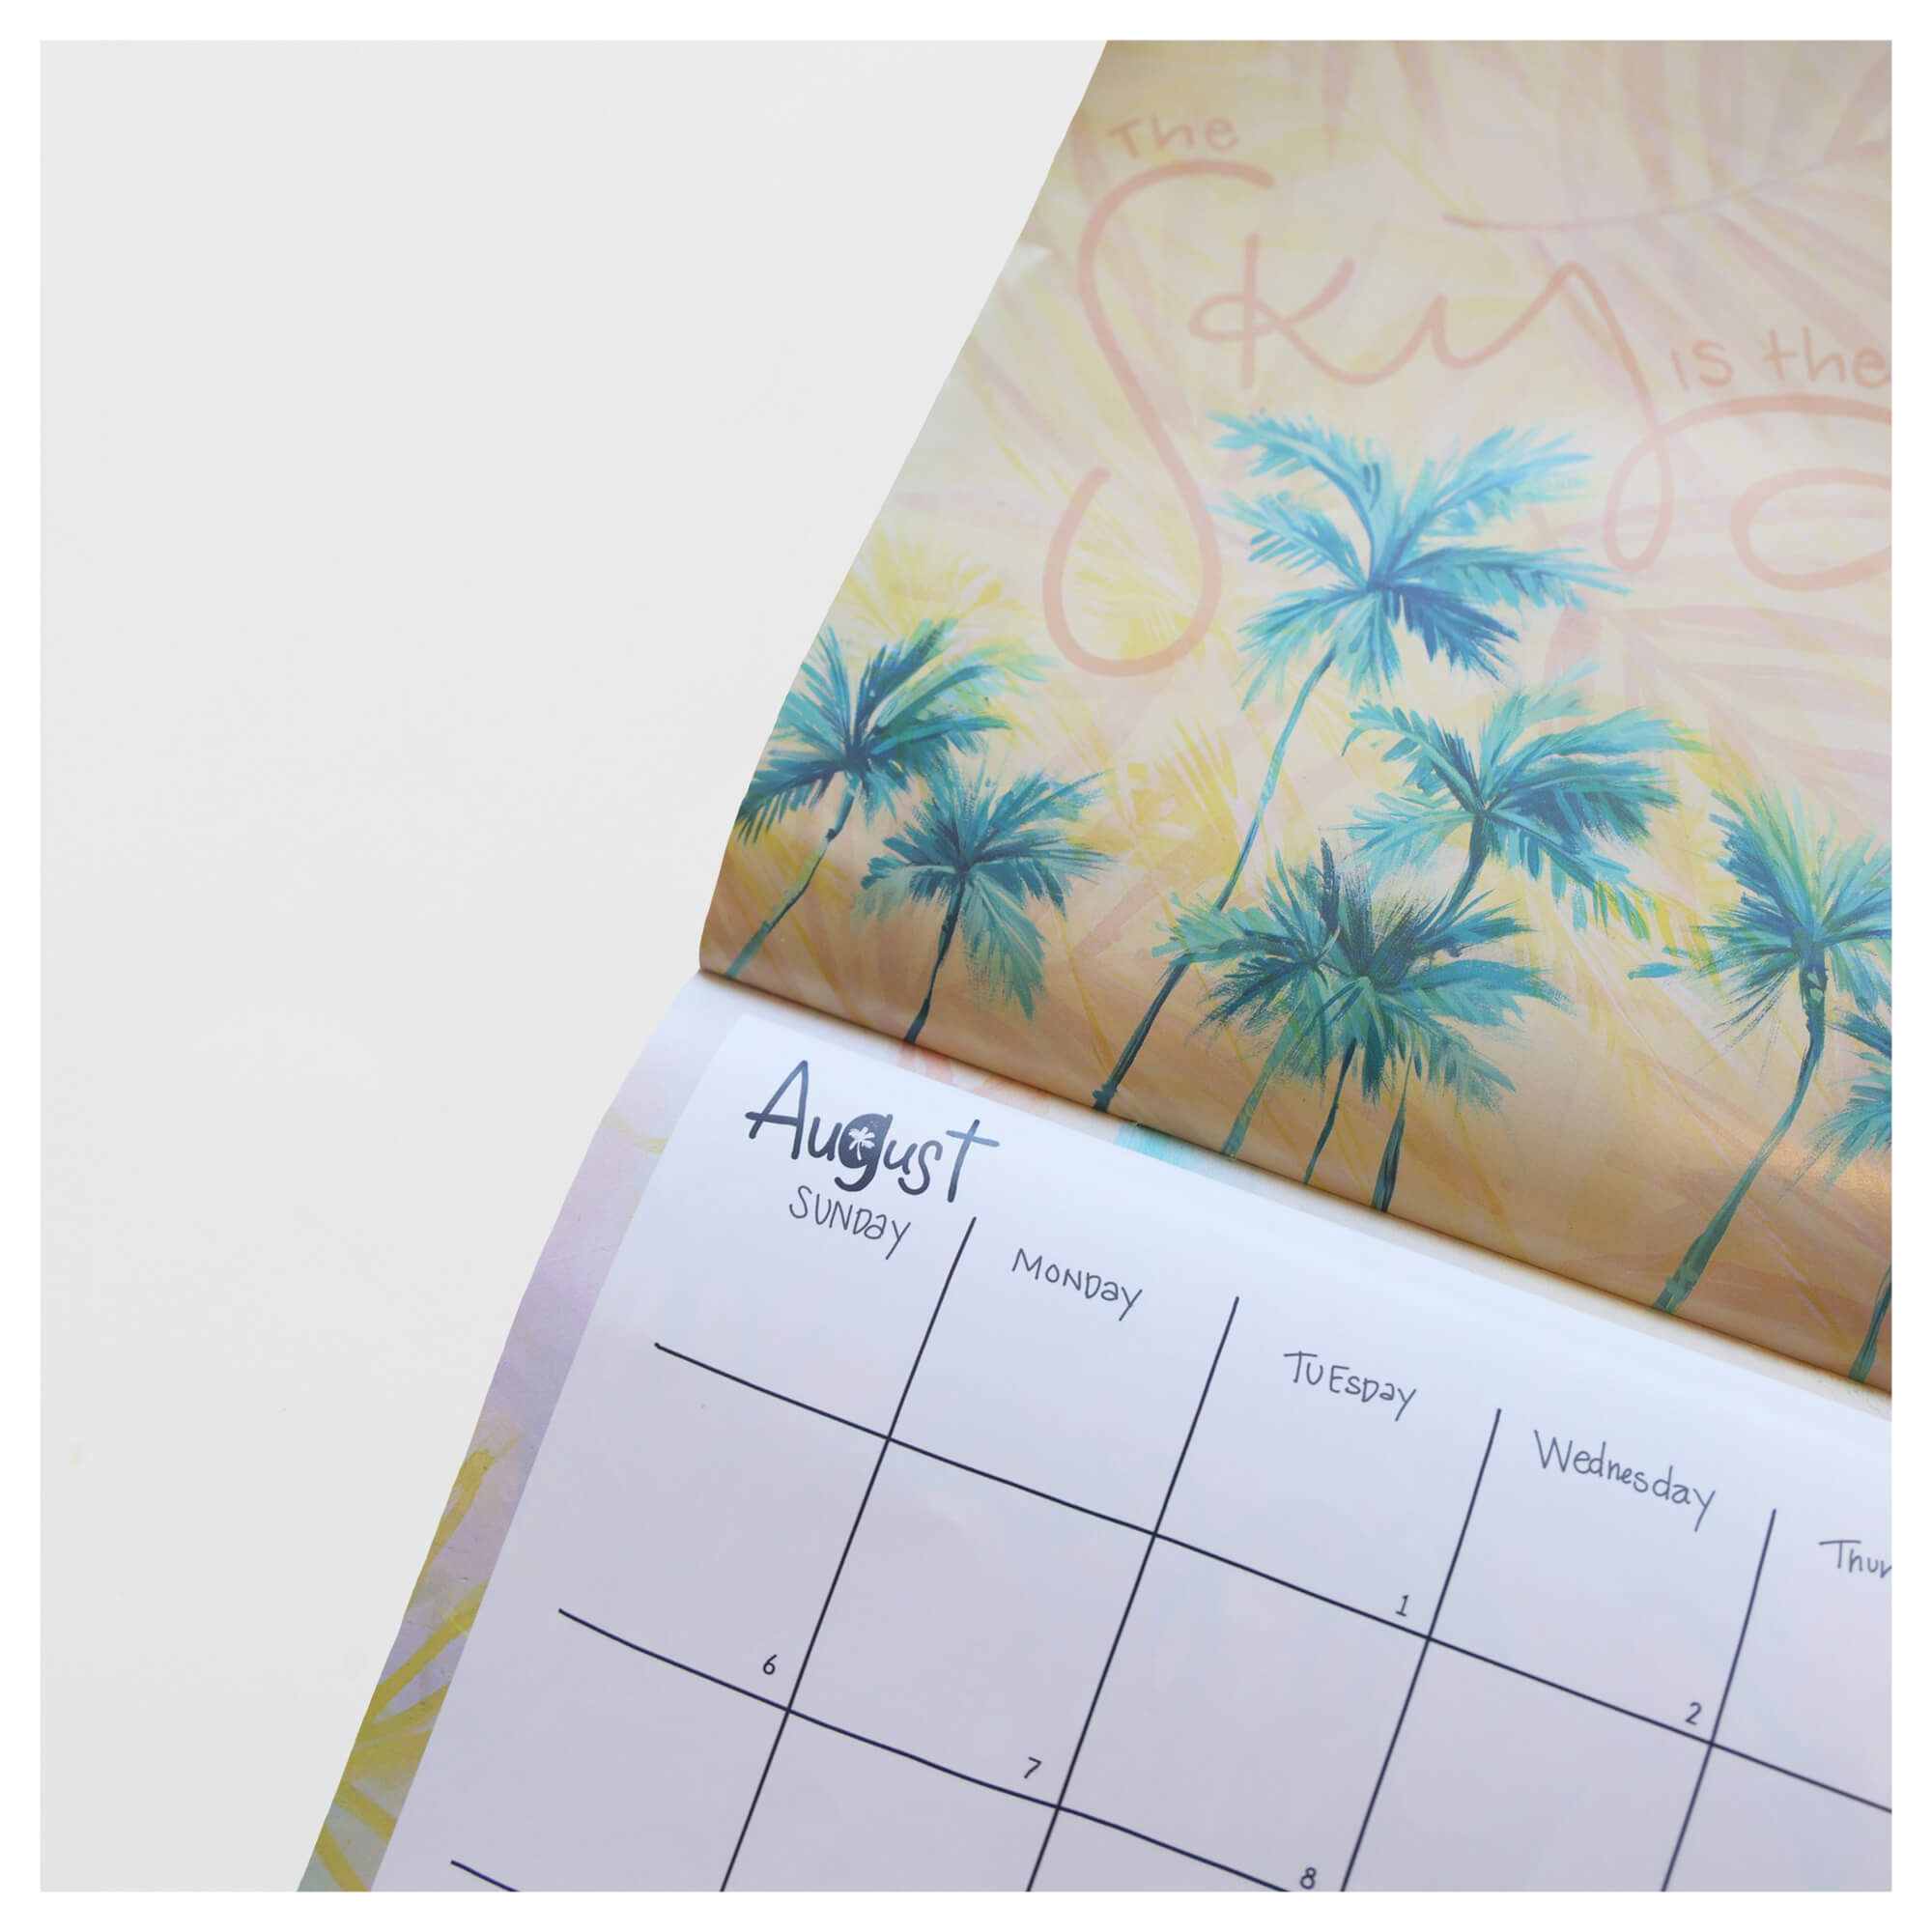 A beautiful pastel-hued 2023 calendar that features Lauren Roth's colorful artworks and favorite quotes